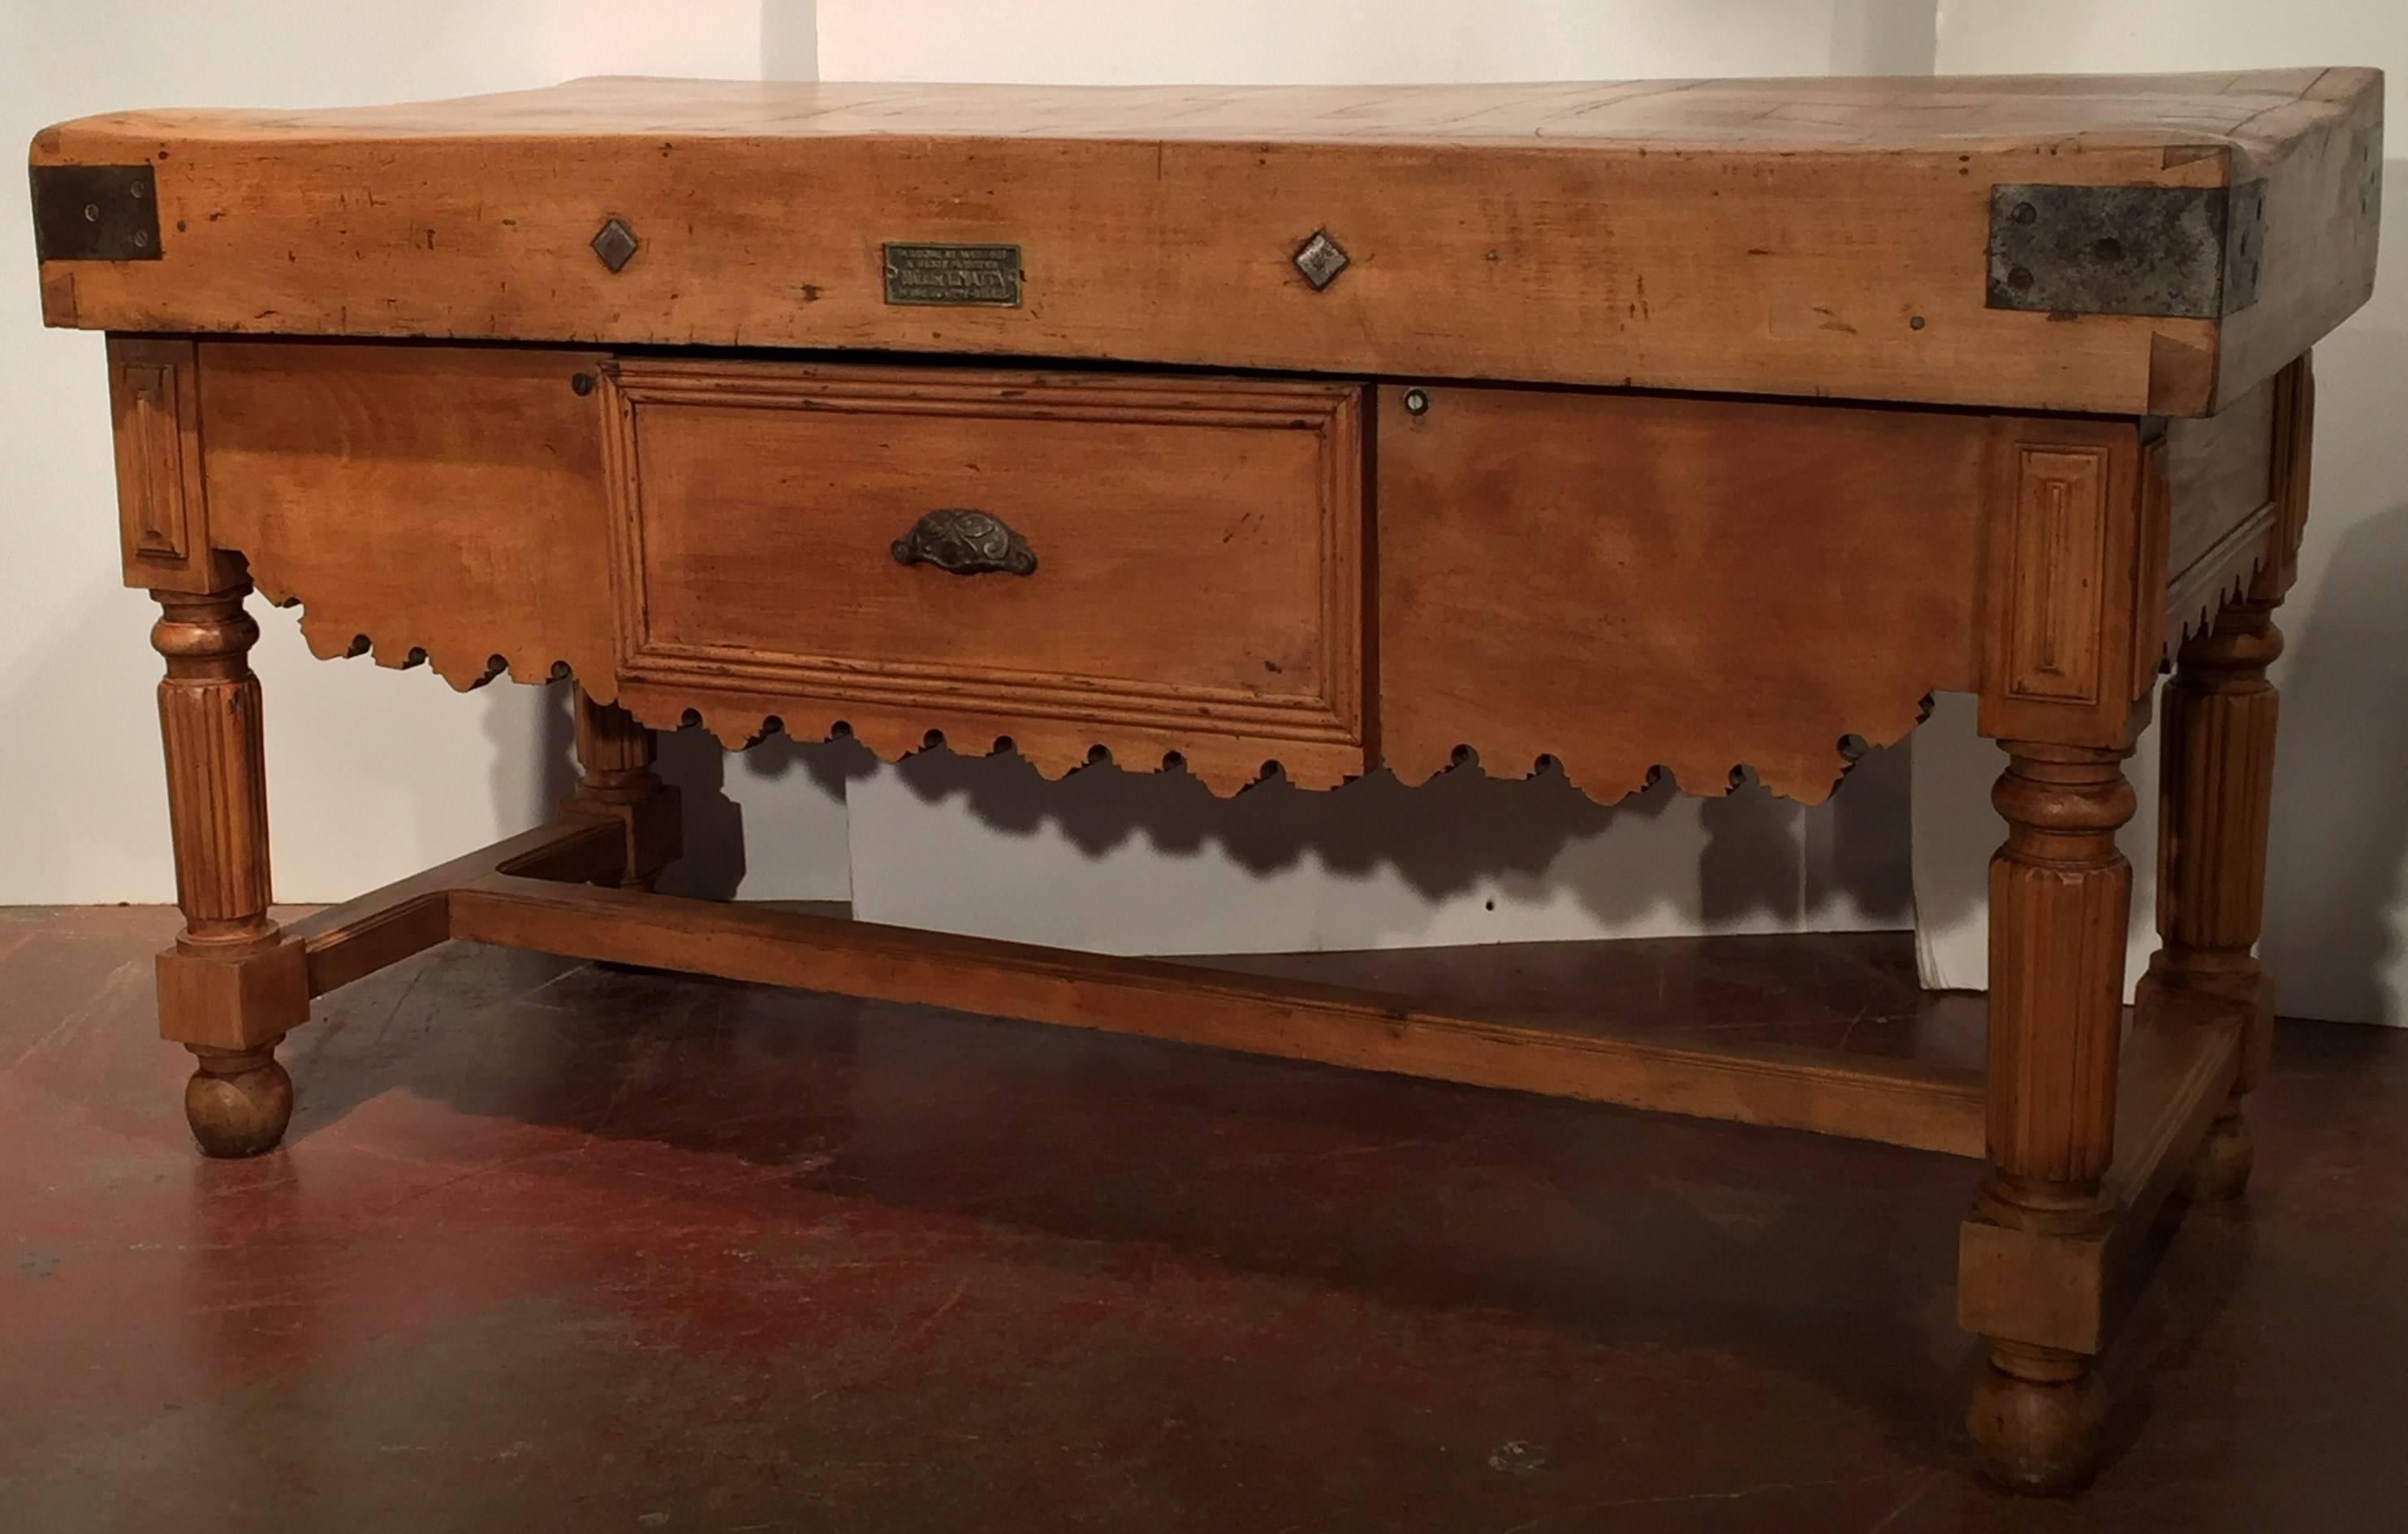 Large 19th century wooden butcher block from Lille (North France). Double sided with one large drawer on the front, this block has wonderful character! A great center island in a kitchen! Original maker's plaque on the front.